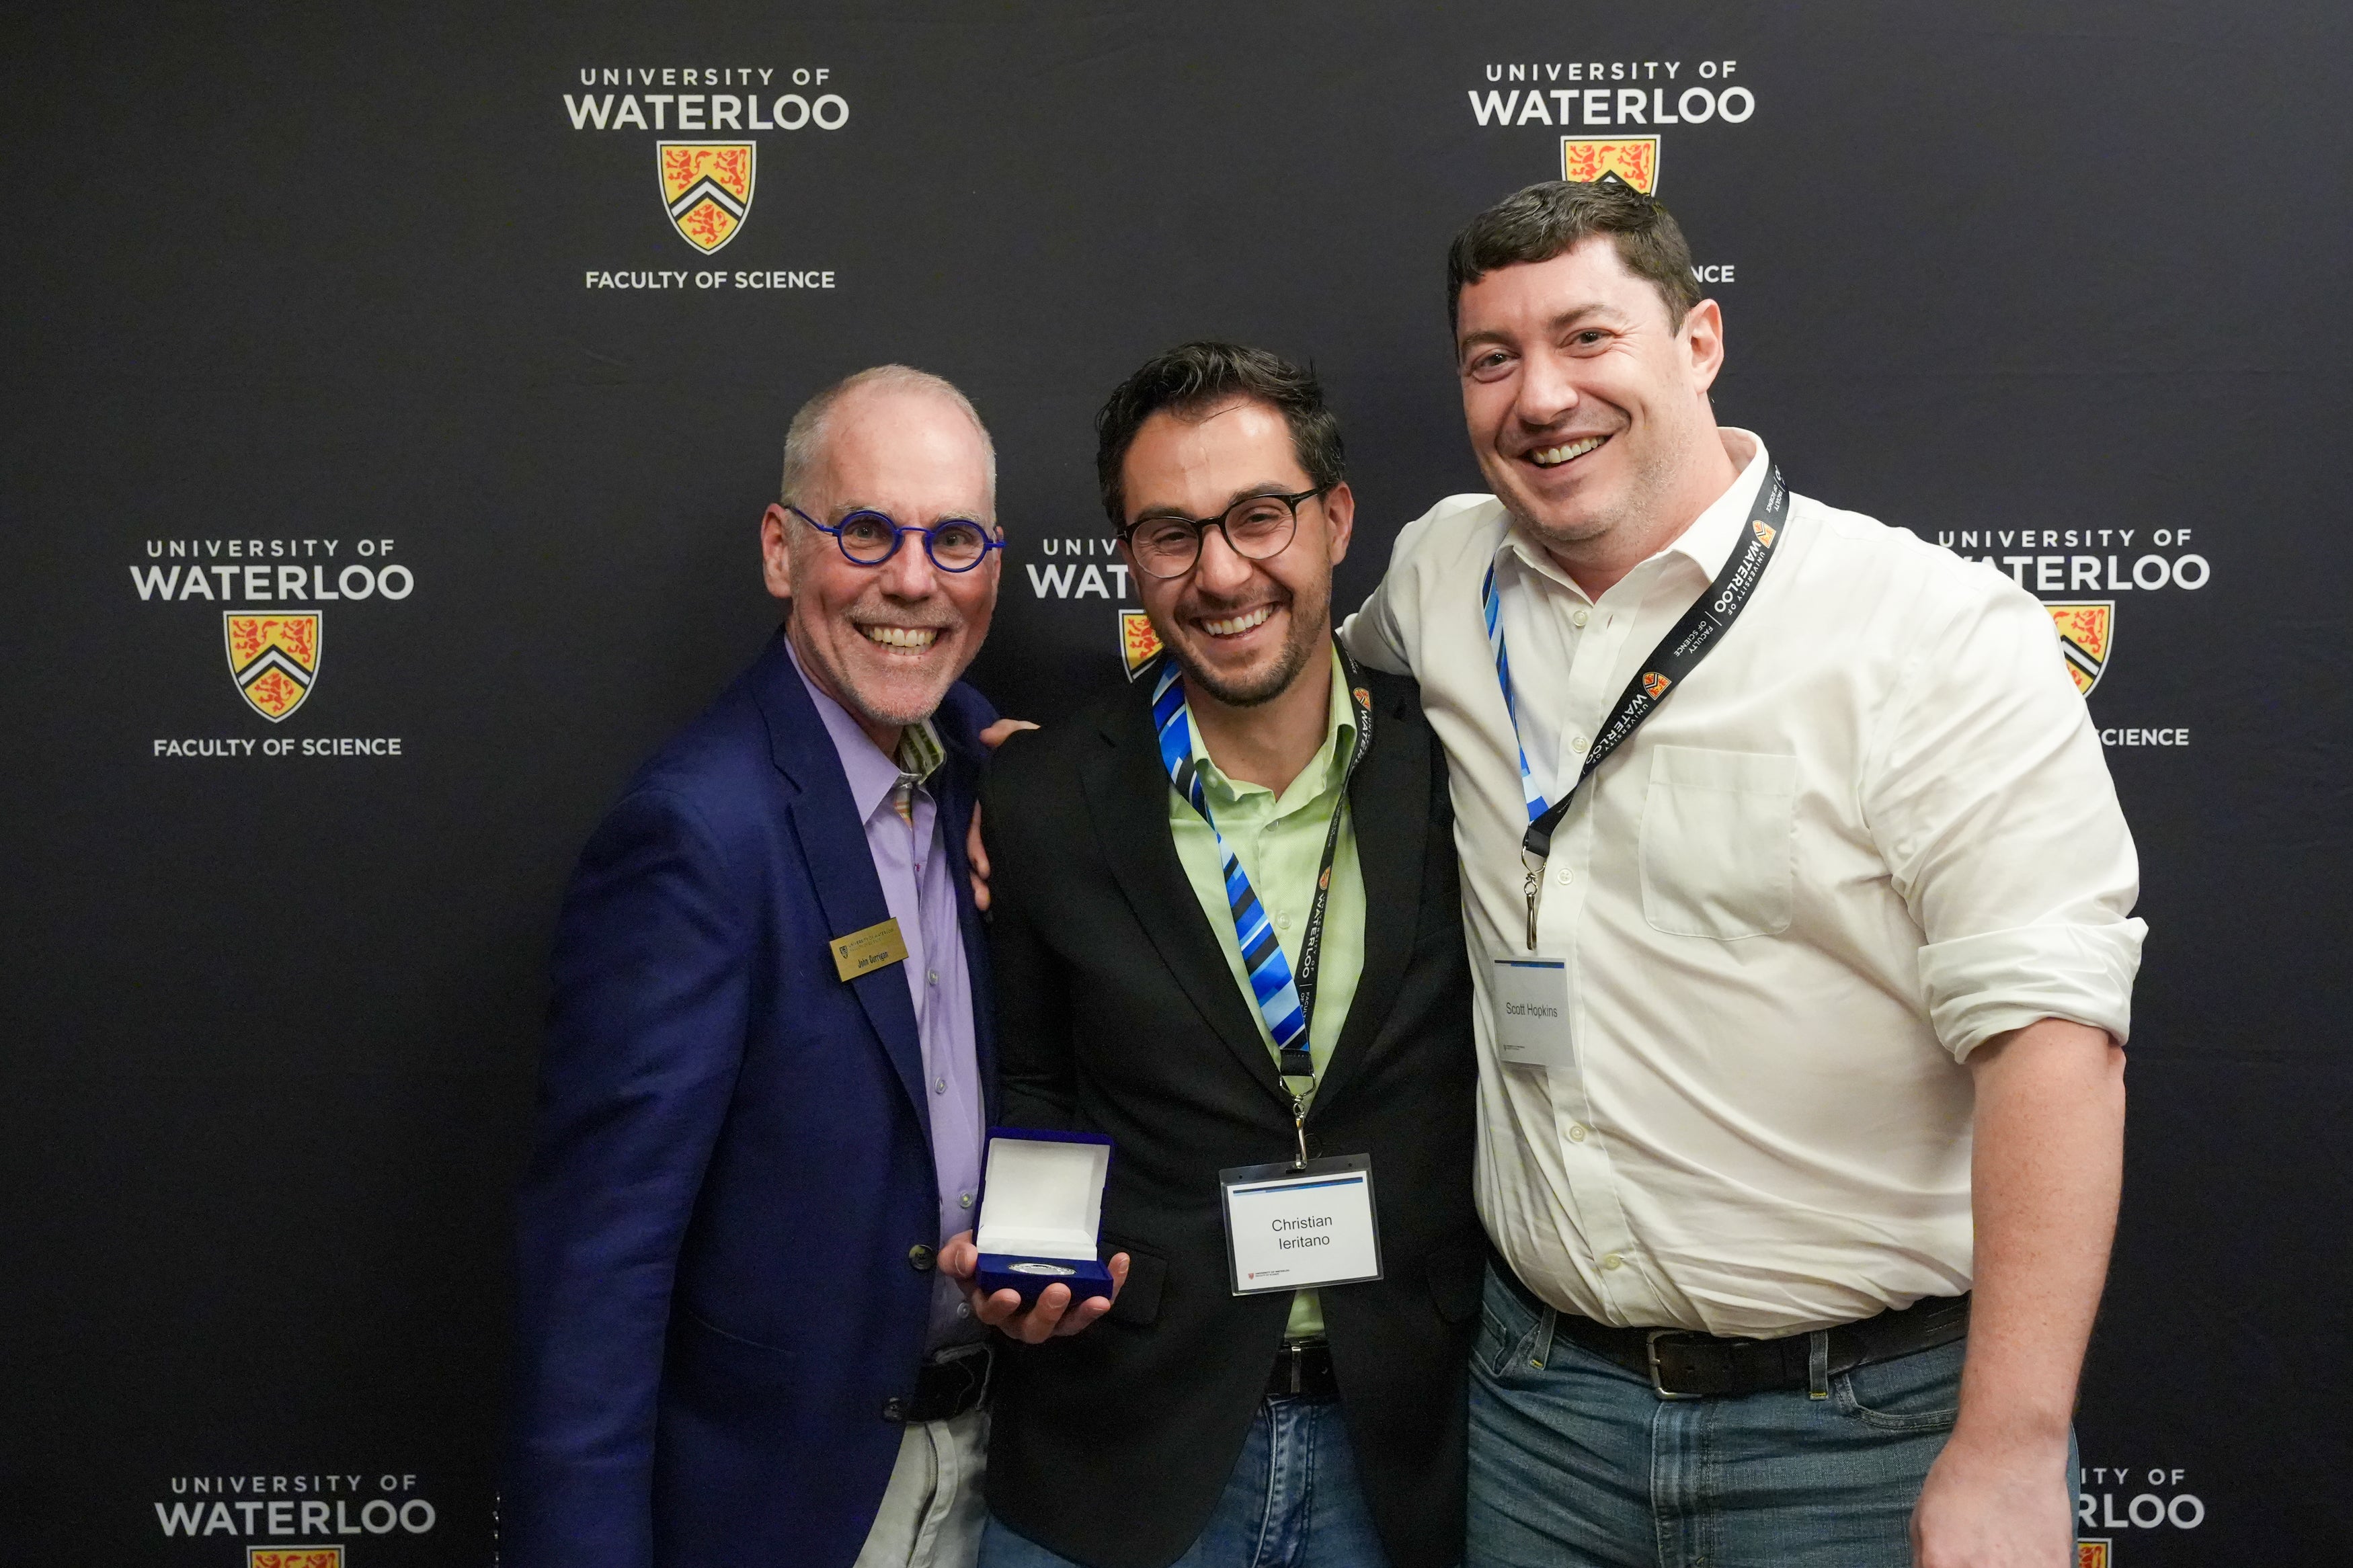 Three men standing against a black background printed with the University of Waterloo logo. One man is holding a medal.